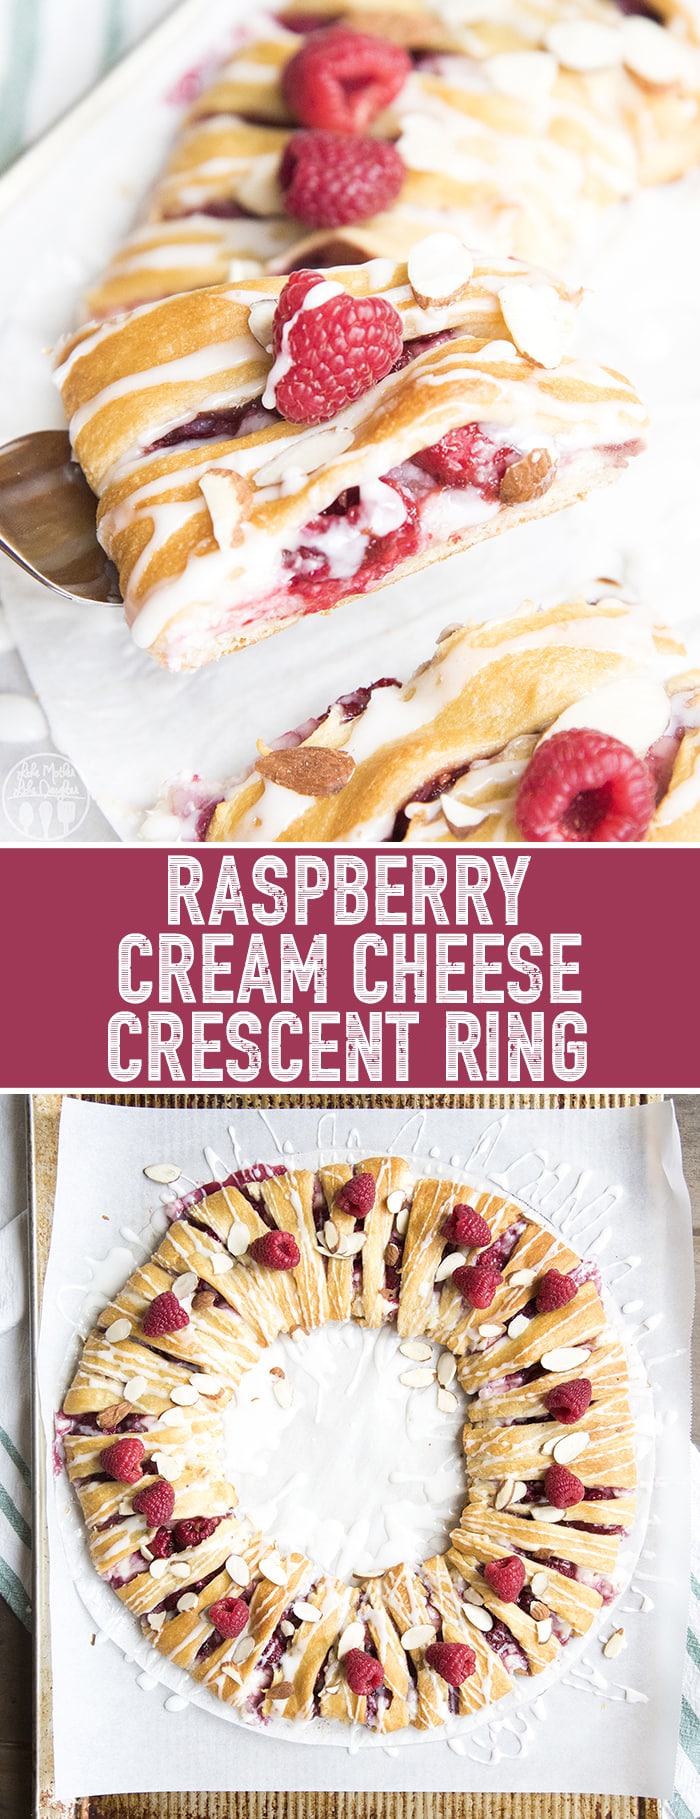 This raspberry cream cheese crescent ring is the perfect holiday breakfast! It's ready in only about 30 minutes, and is such a beautiful dish!